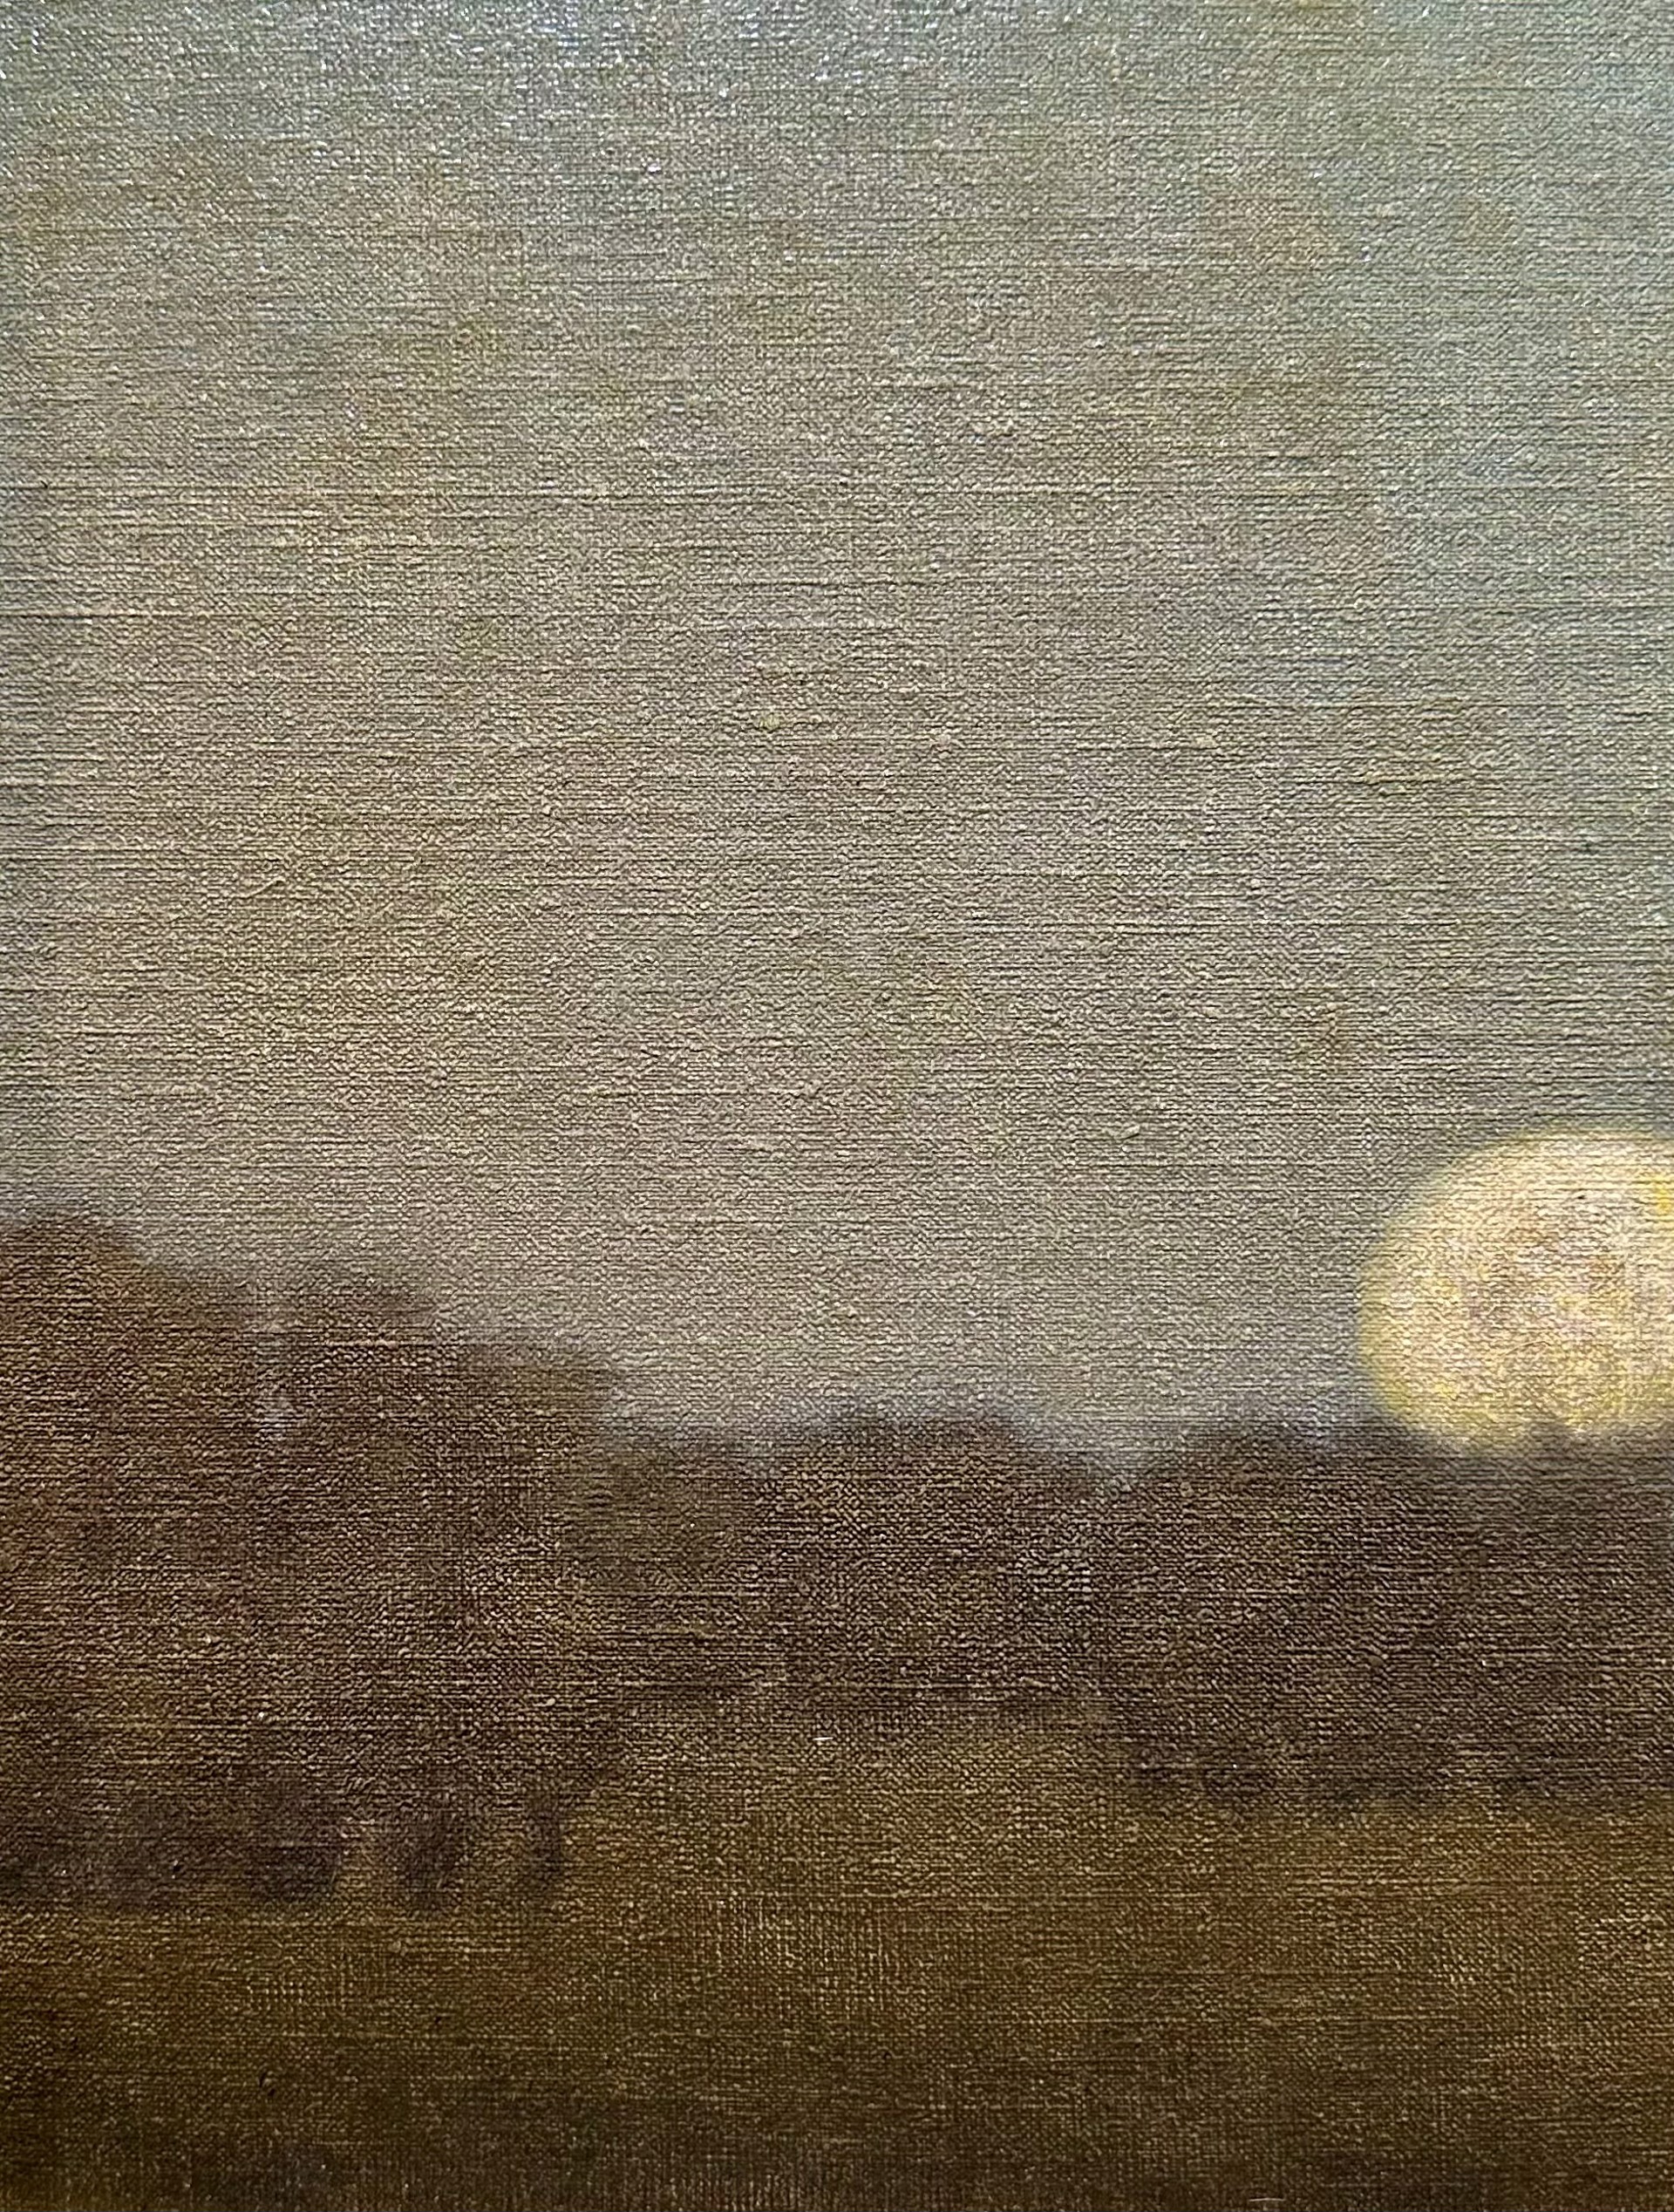 FALL MOON RISING by William "Lucky" Davis